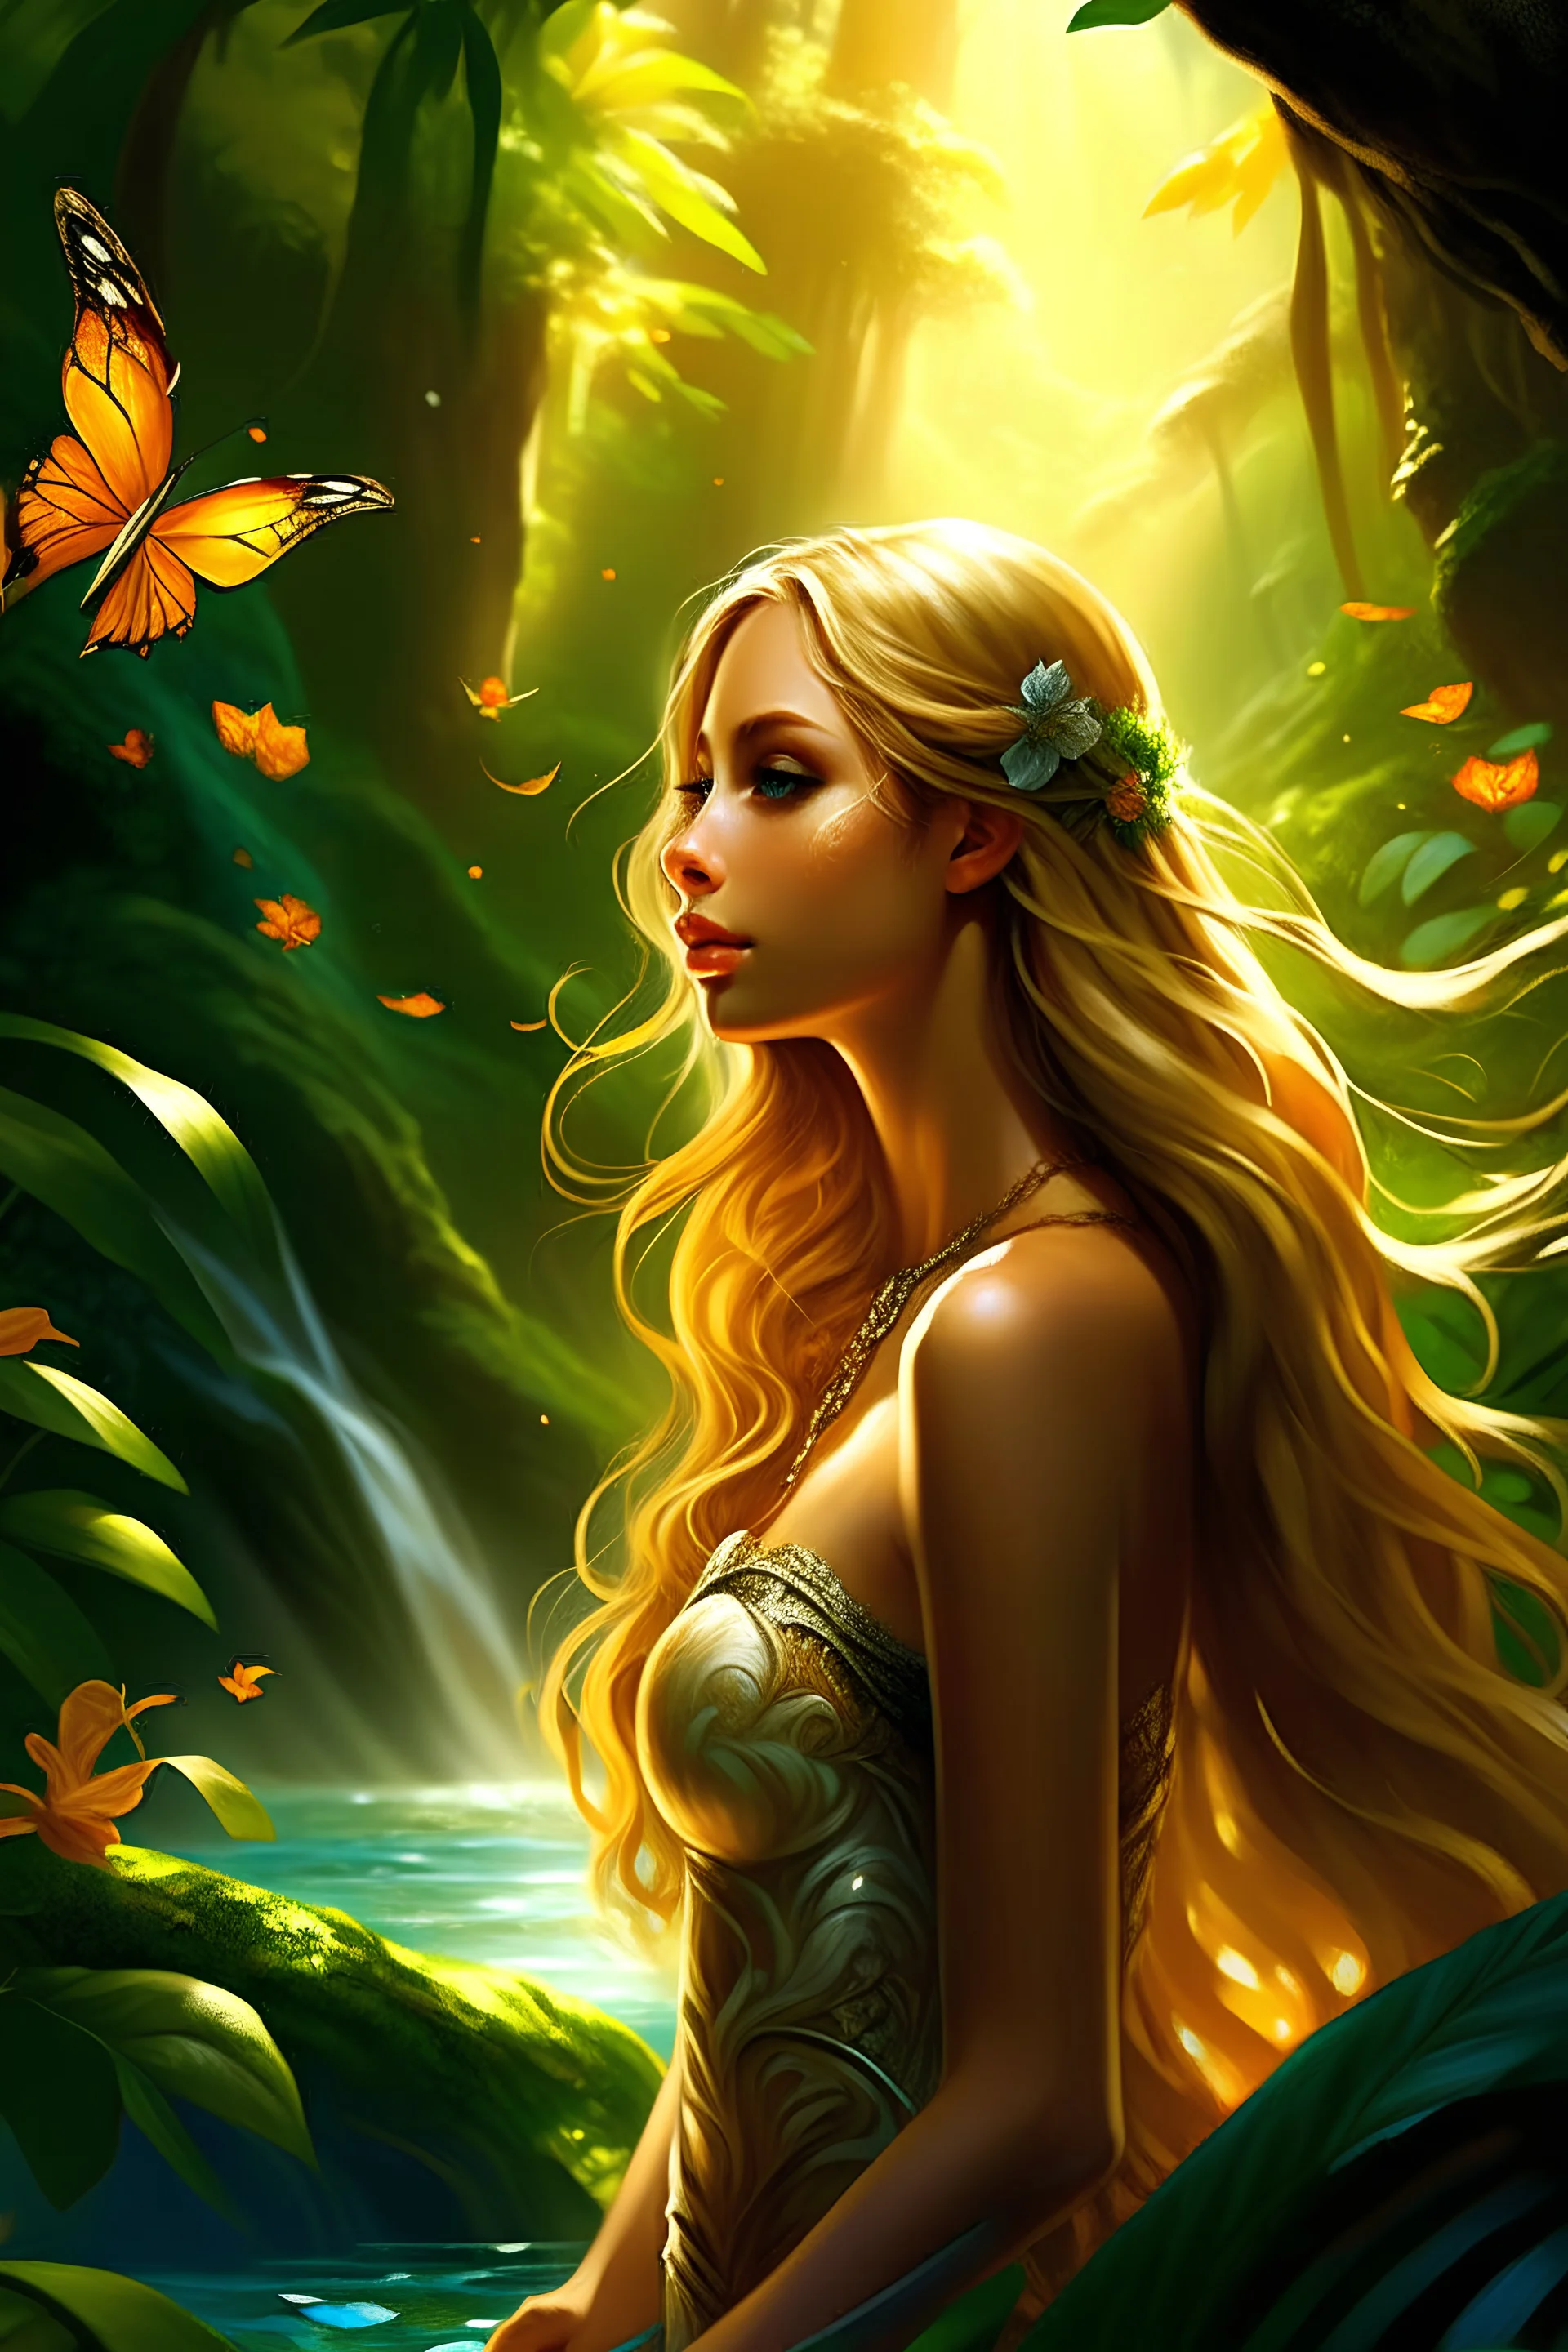 A captivating image of a graceful, powerful and mysterious woman with light brown skin and long fiery blond hair, which appears to be on fire, as her wavy locks flow in a flowing tropical jungle-waterfall breeze. She wields a beautiful bow, decorated with intricate embellishments and graceful designs. The sunlight casts long shadows, emphasizing the delicate beauty of the woman and evoking a sense of mystery and connection. The shallow depth of field isolates the woman and the desert environment